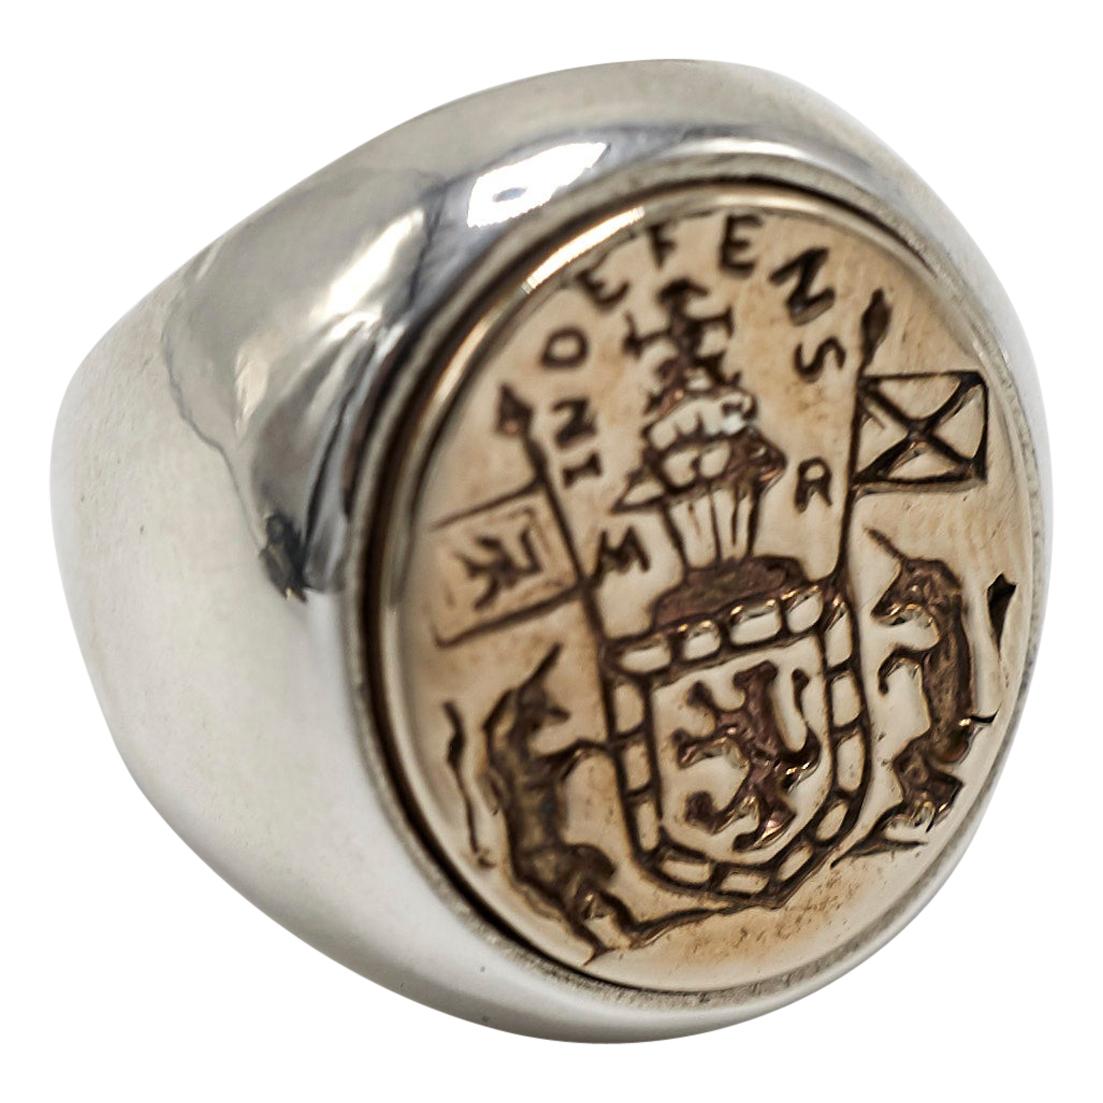 Crest Signet Ring Sterling Silver Bronze Unisex J Dauphin can be worn by women or men.

Inspired by Queen Mary of Scots ring. Gold signet-ring; engraved; shoulders ornamented with flowers and leaves. Oval bezel set with silver intaglio depicting